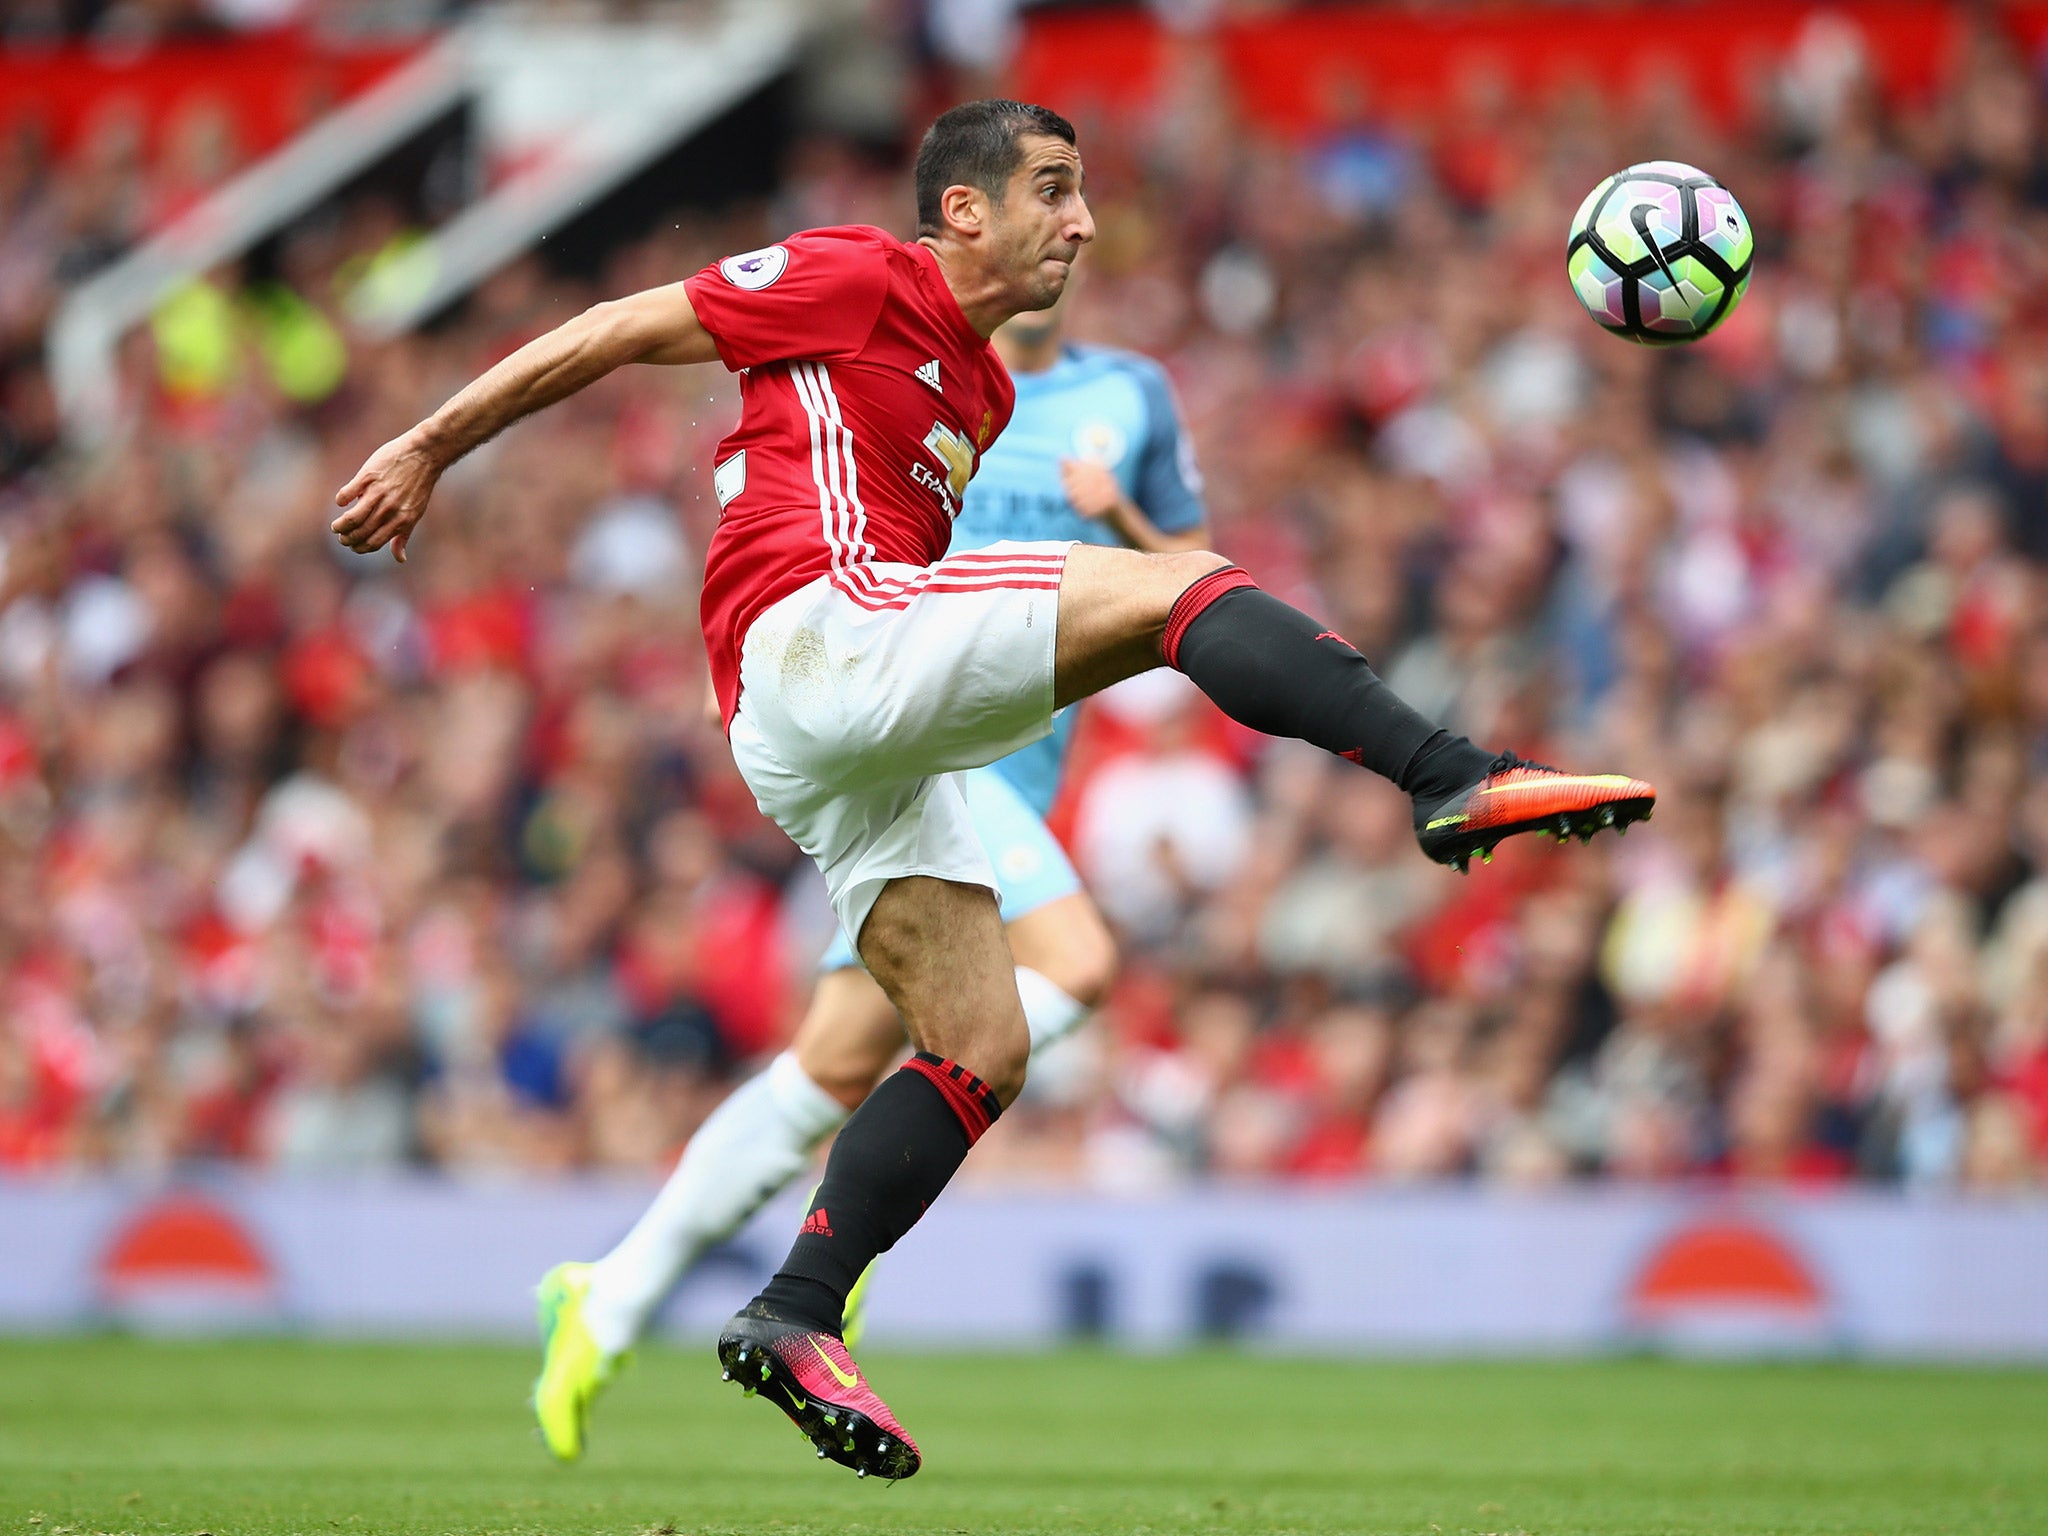 Henrikh Mkhitaryan has not played since the Manchester derby defeat